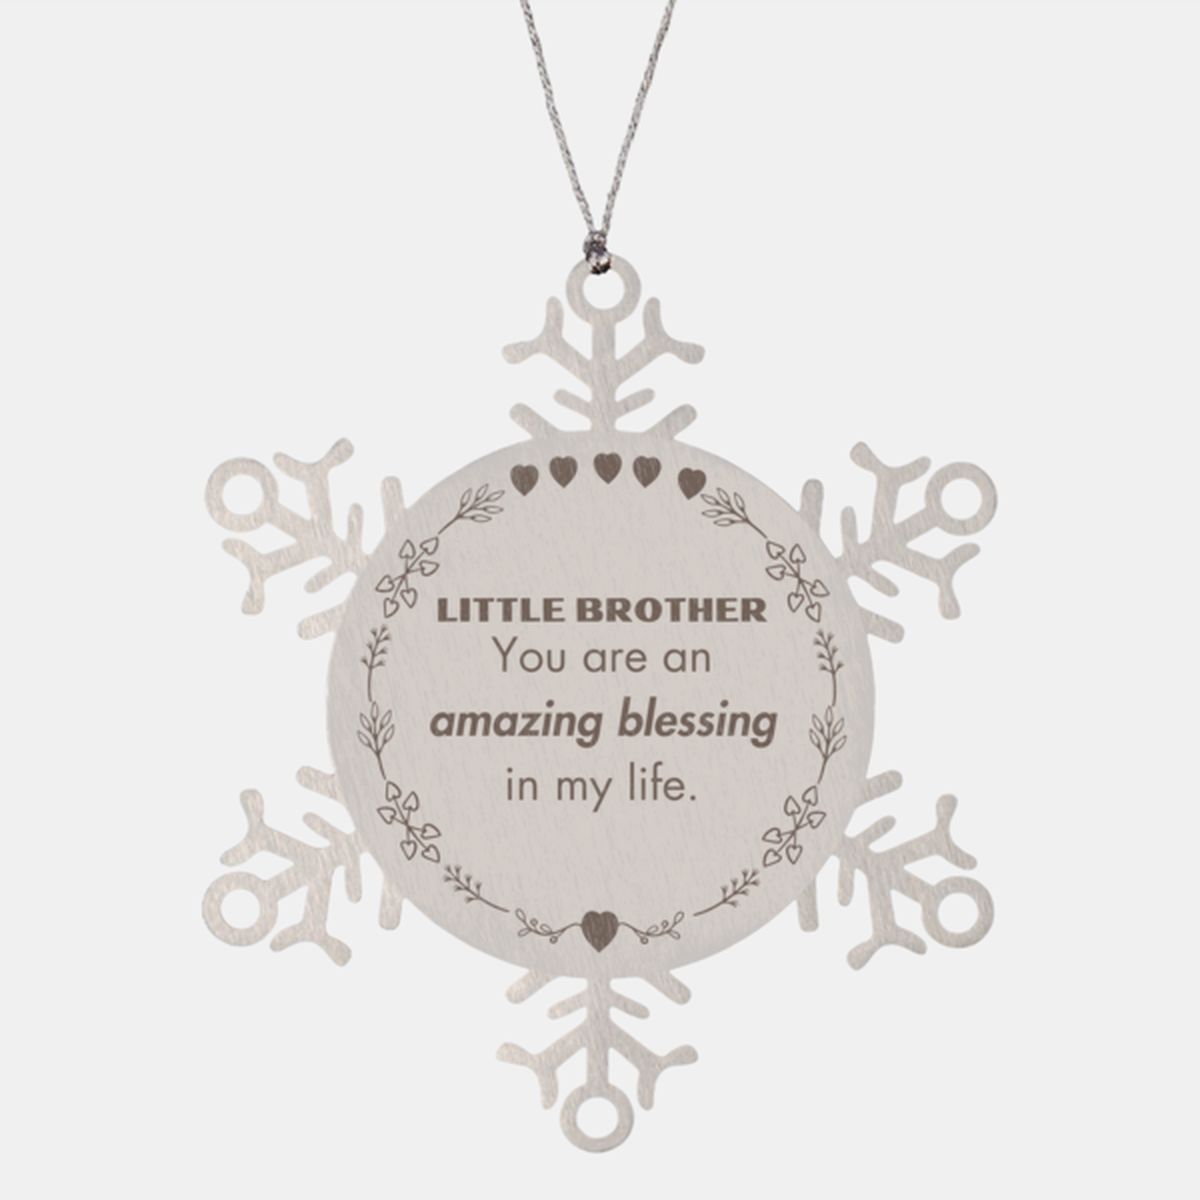 Little Brother Snowflake Ornament, You are an amazing blessing in my life, Thank You Gifts For Little Brother, Inspirational Birthday Christmas Unique Gifts For Little Brother